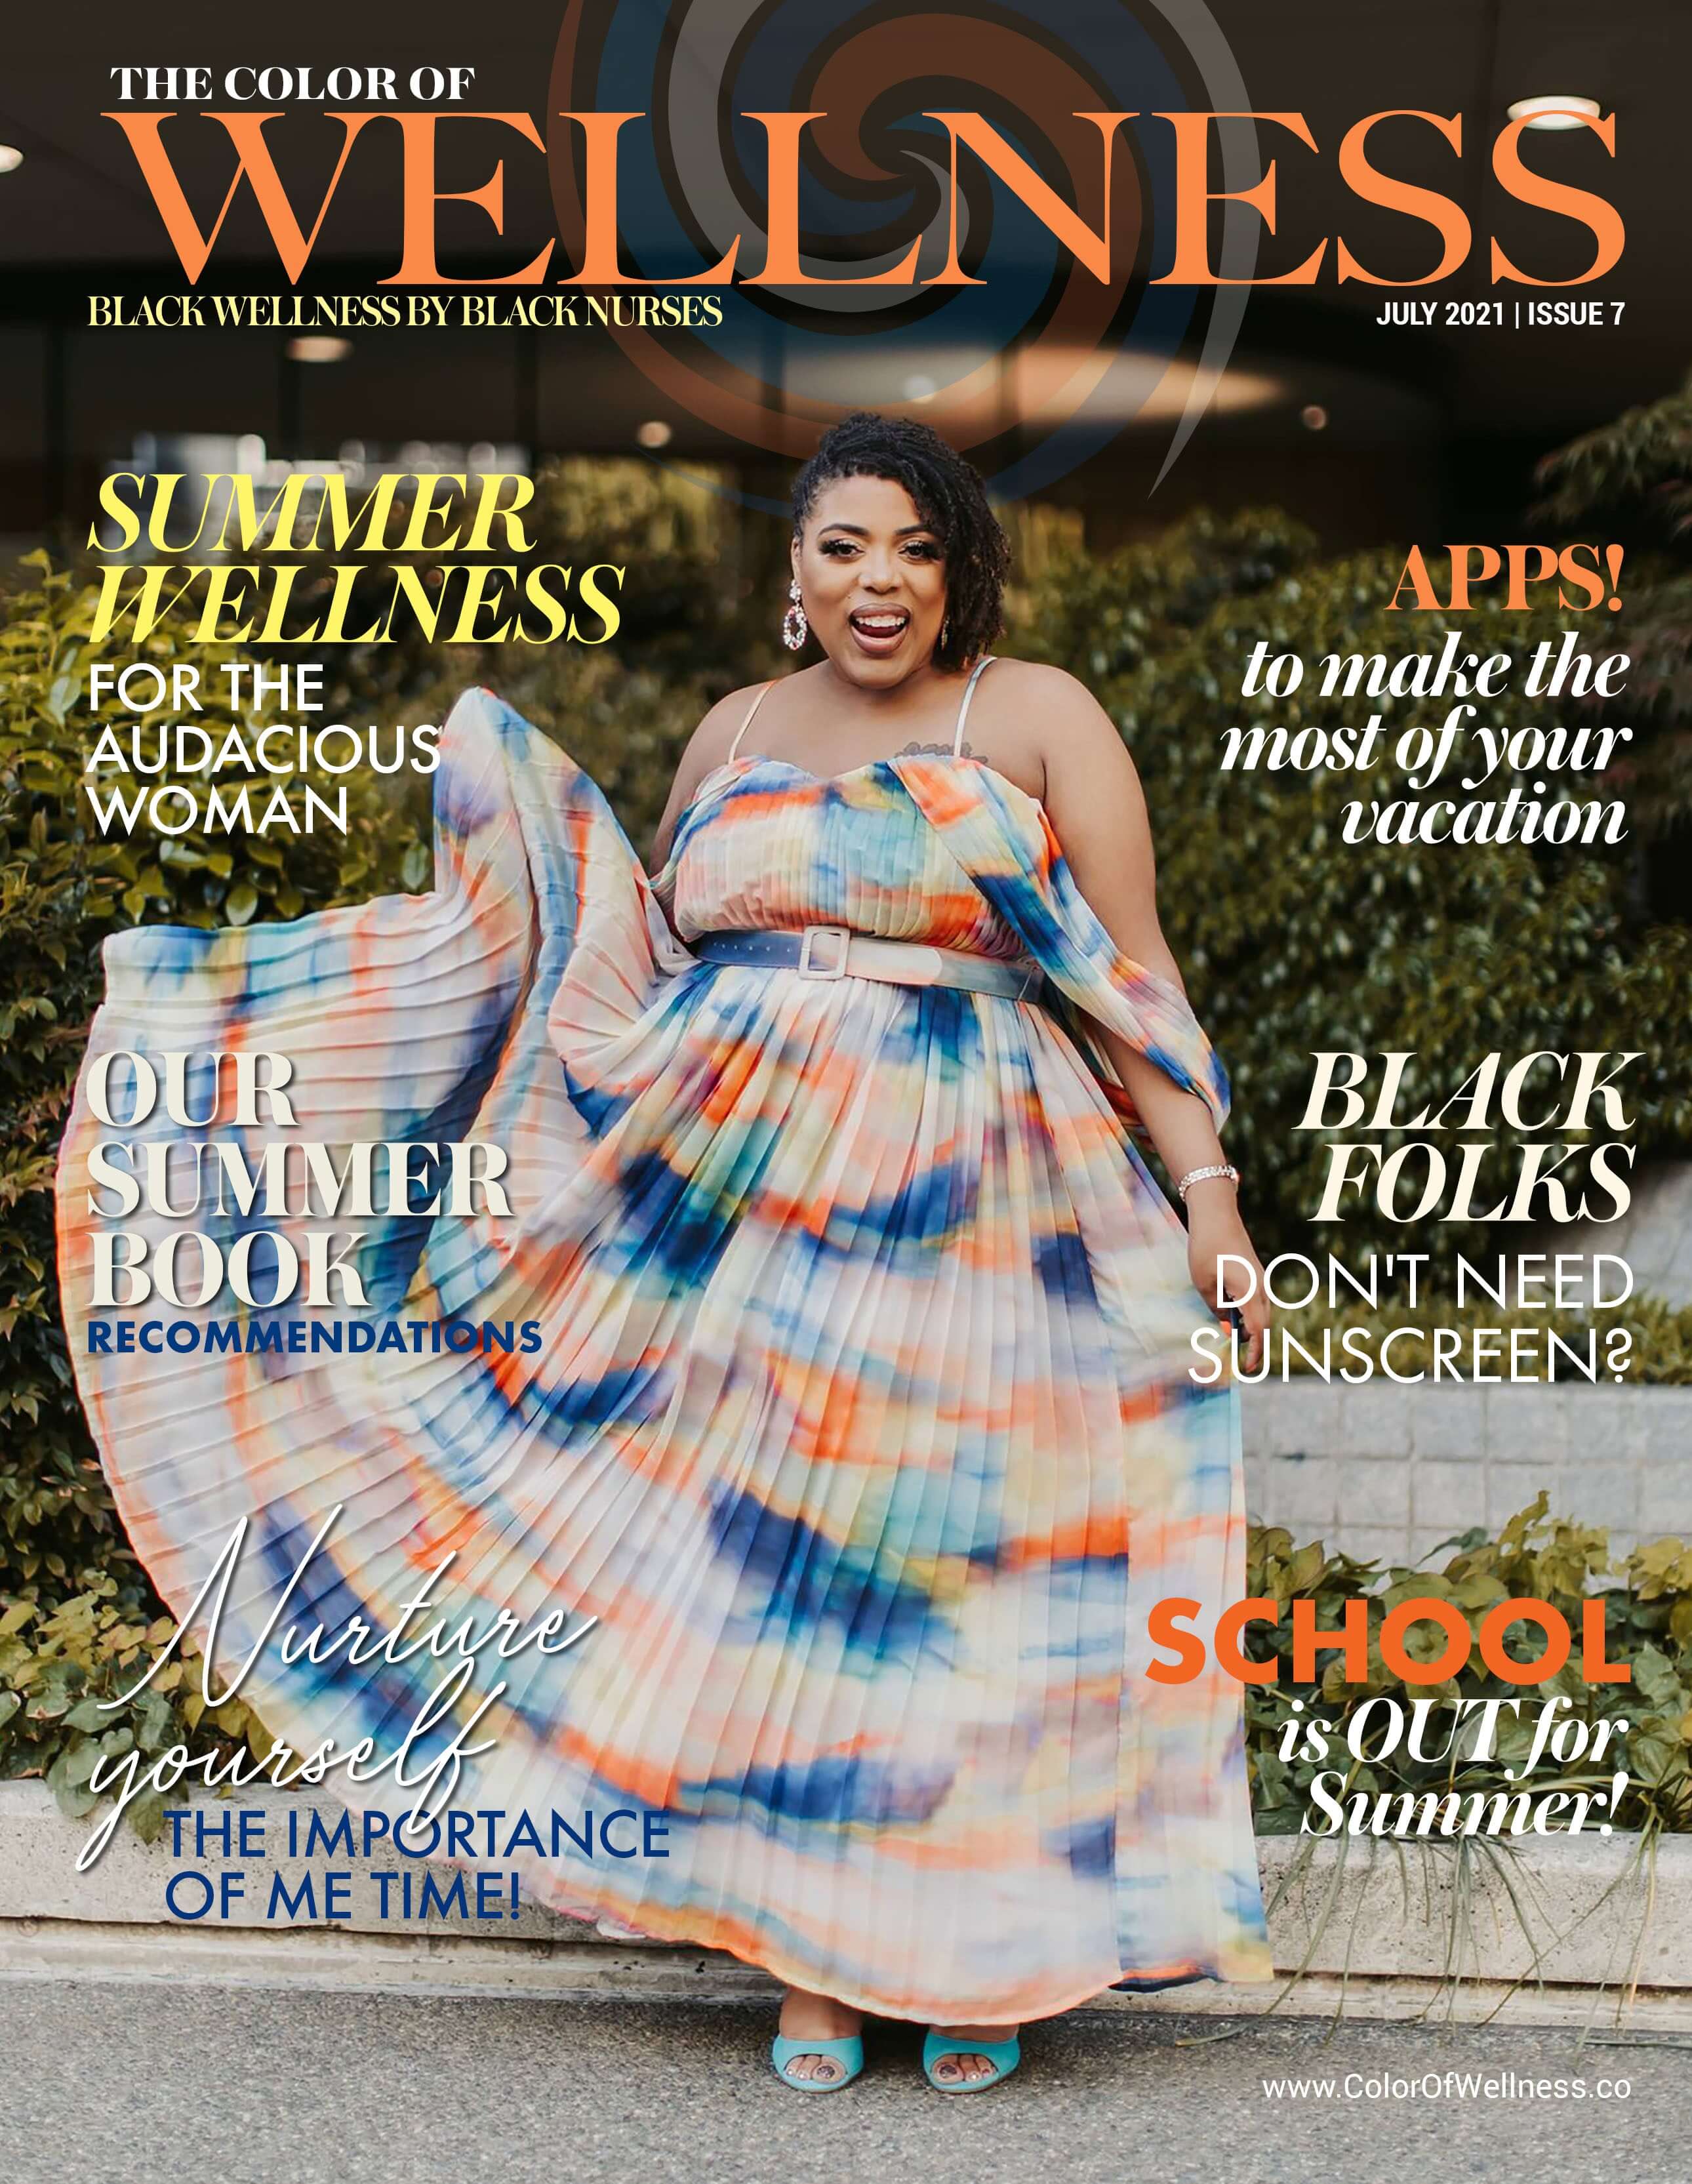 Cover of the Color of Wellness Magazine July 2021 issue 7.